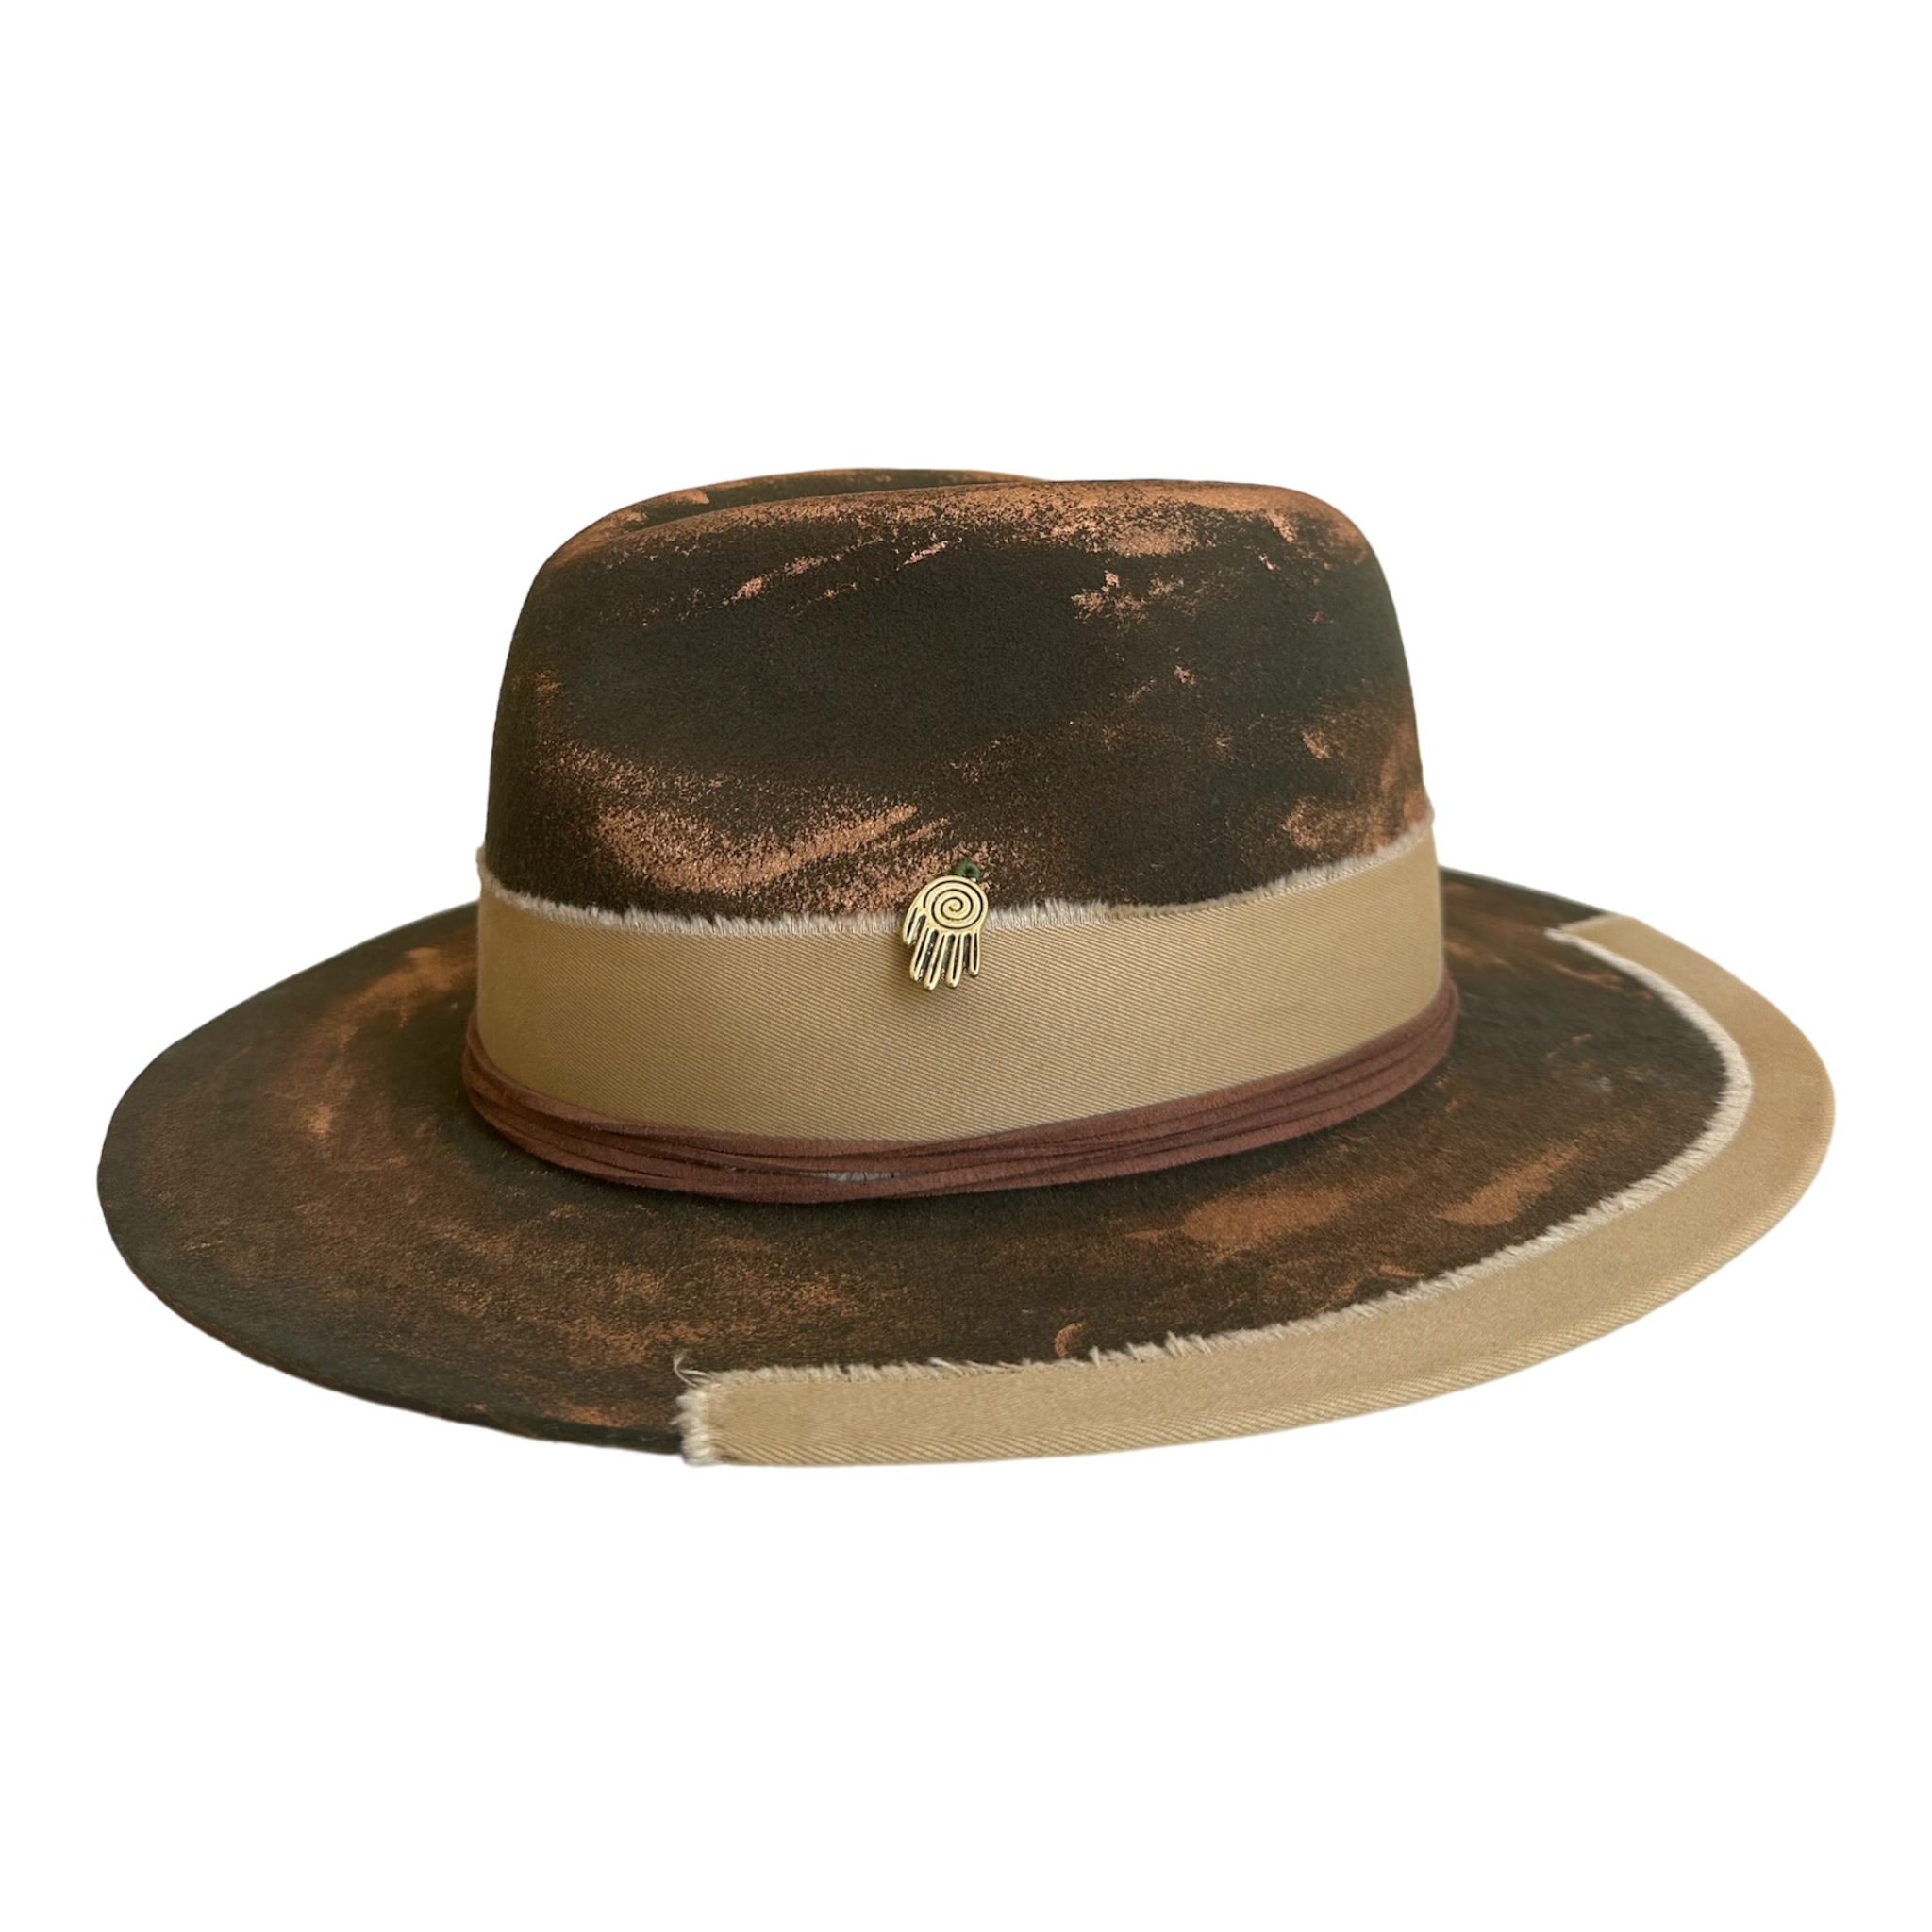 Green Jar - Adult Fedora Hat By Bruce And Noah